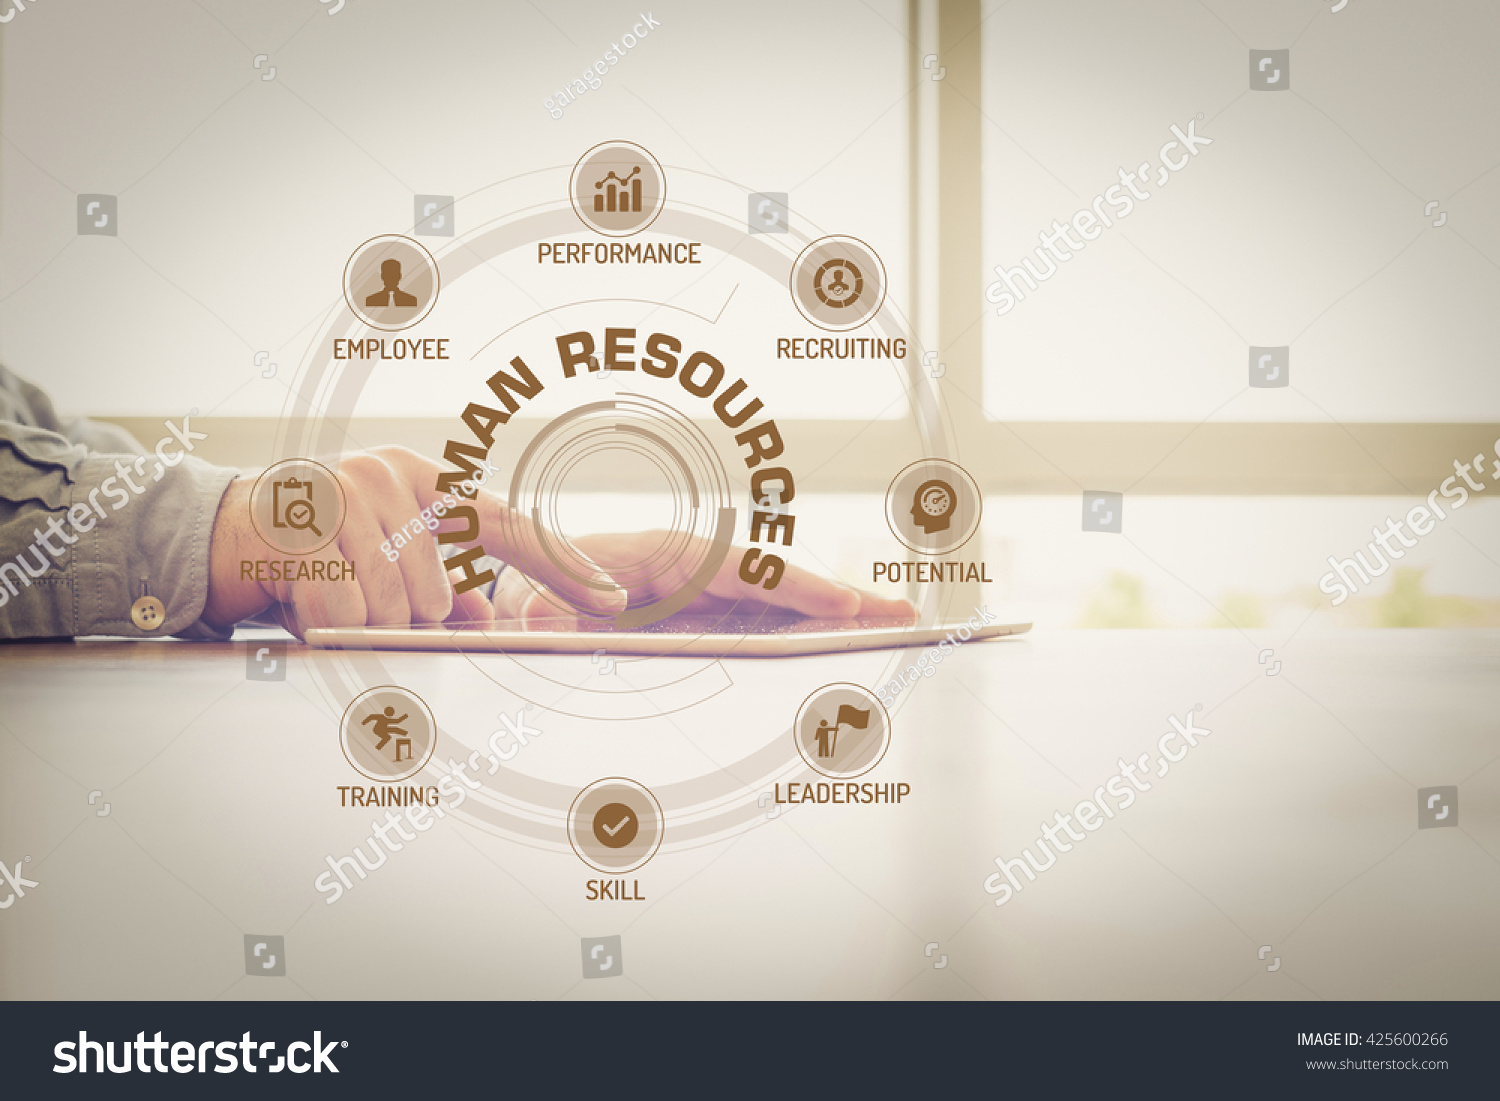 HUMAN RESOURCES chart with keywords and icons on screen #425600266